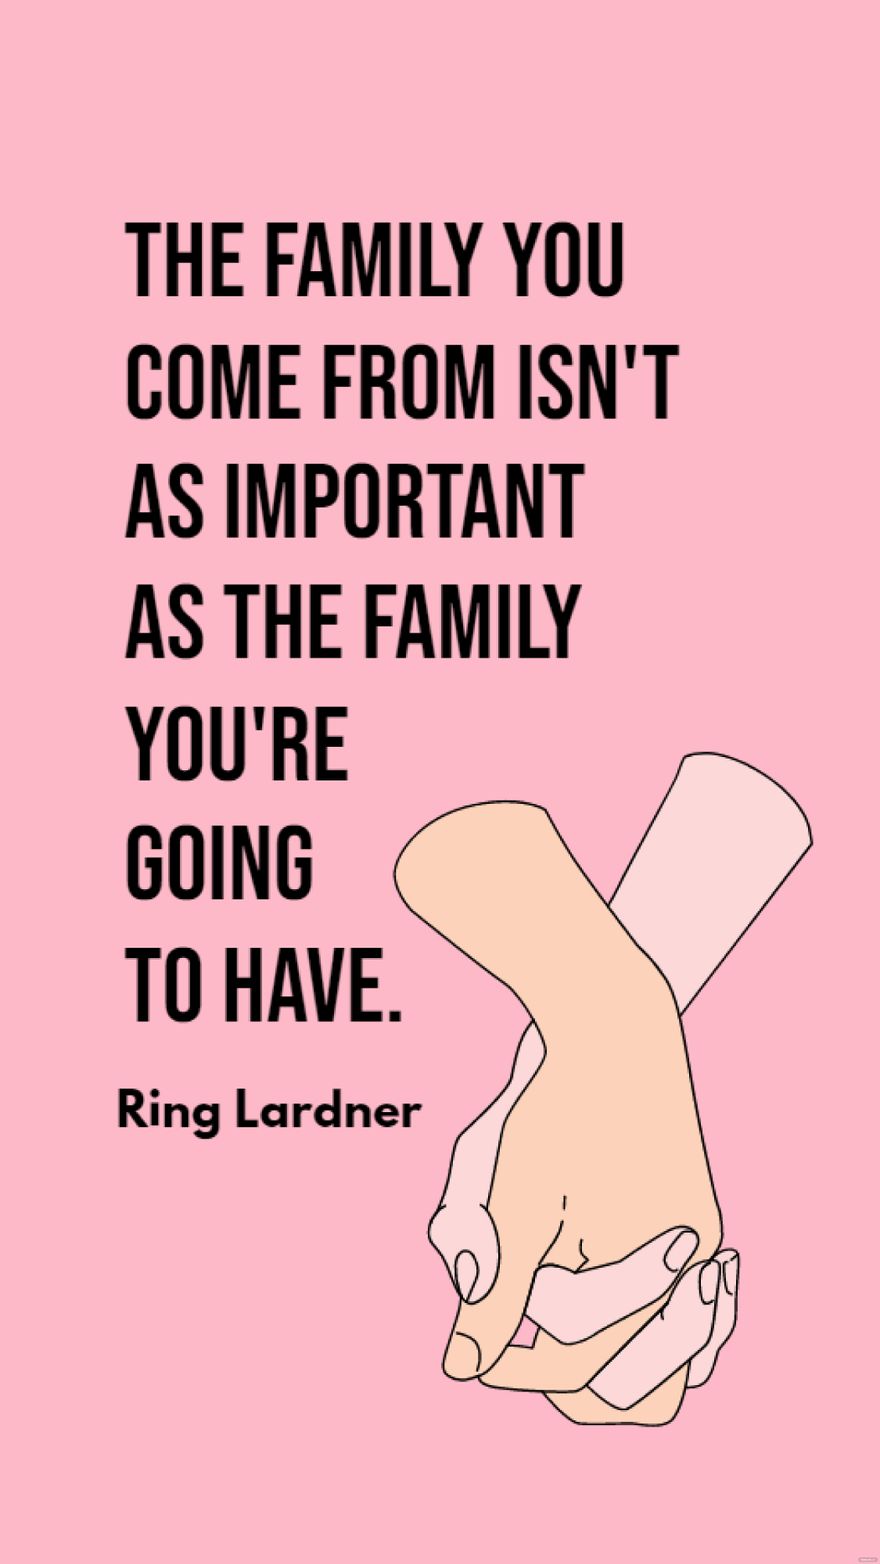 Free Ring Lardner - The family you come from isn't as important as the family you're going to have.